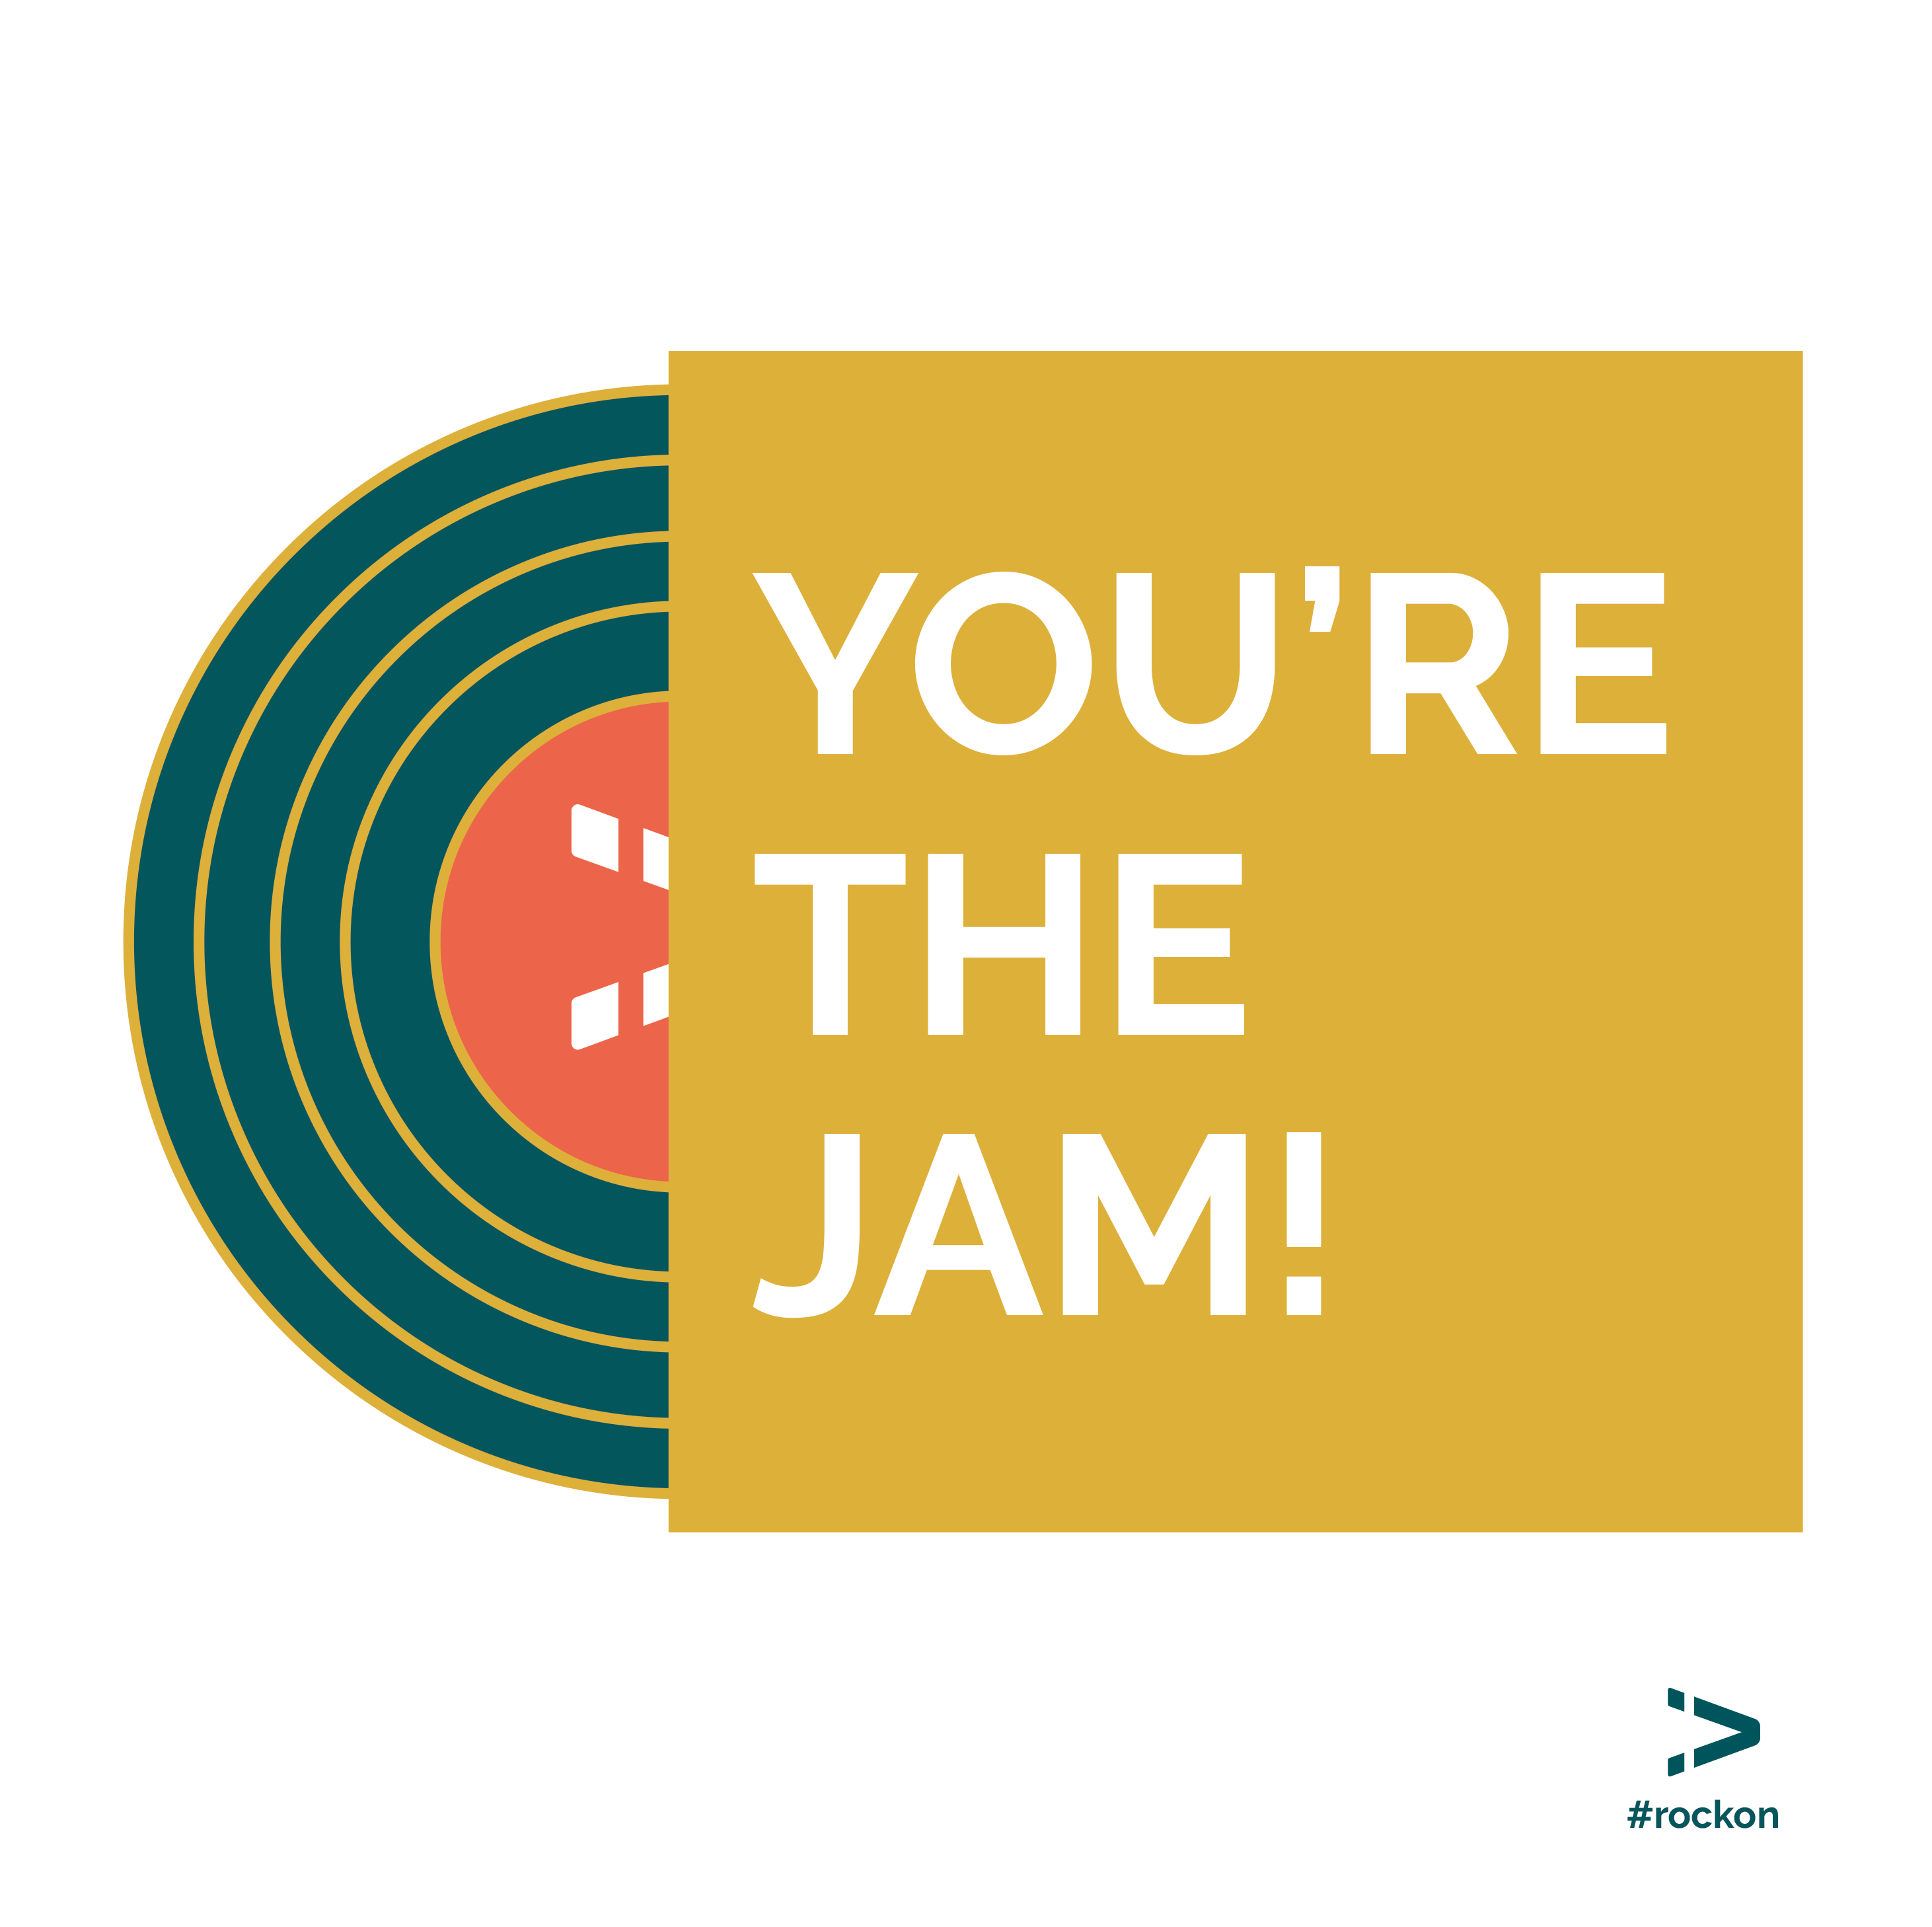 You're the jam